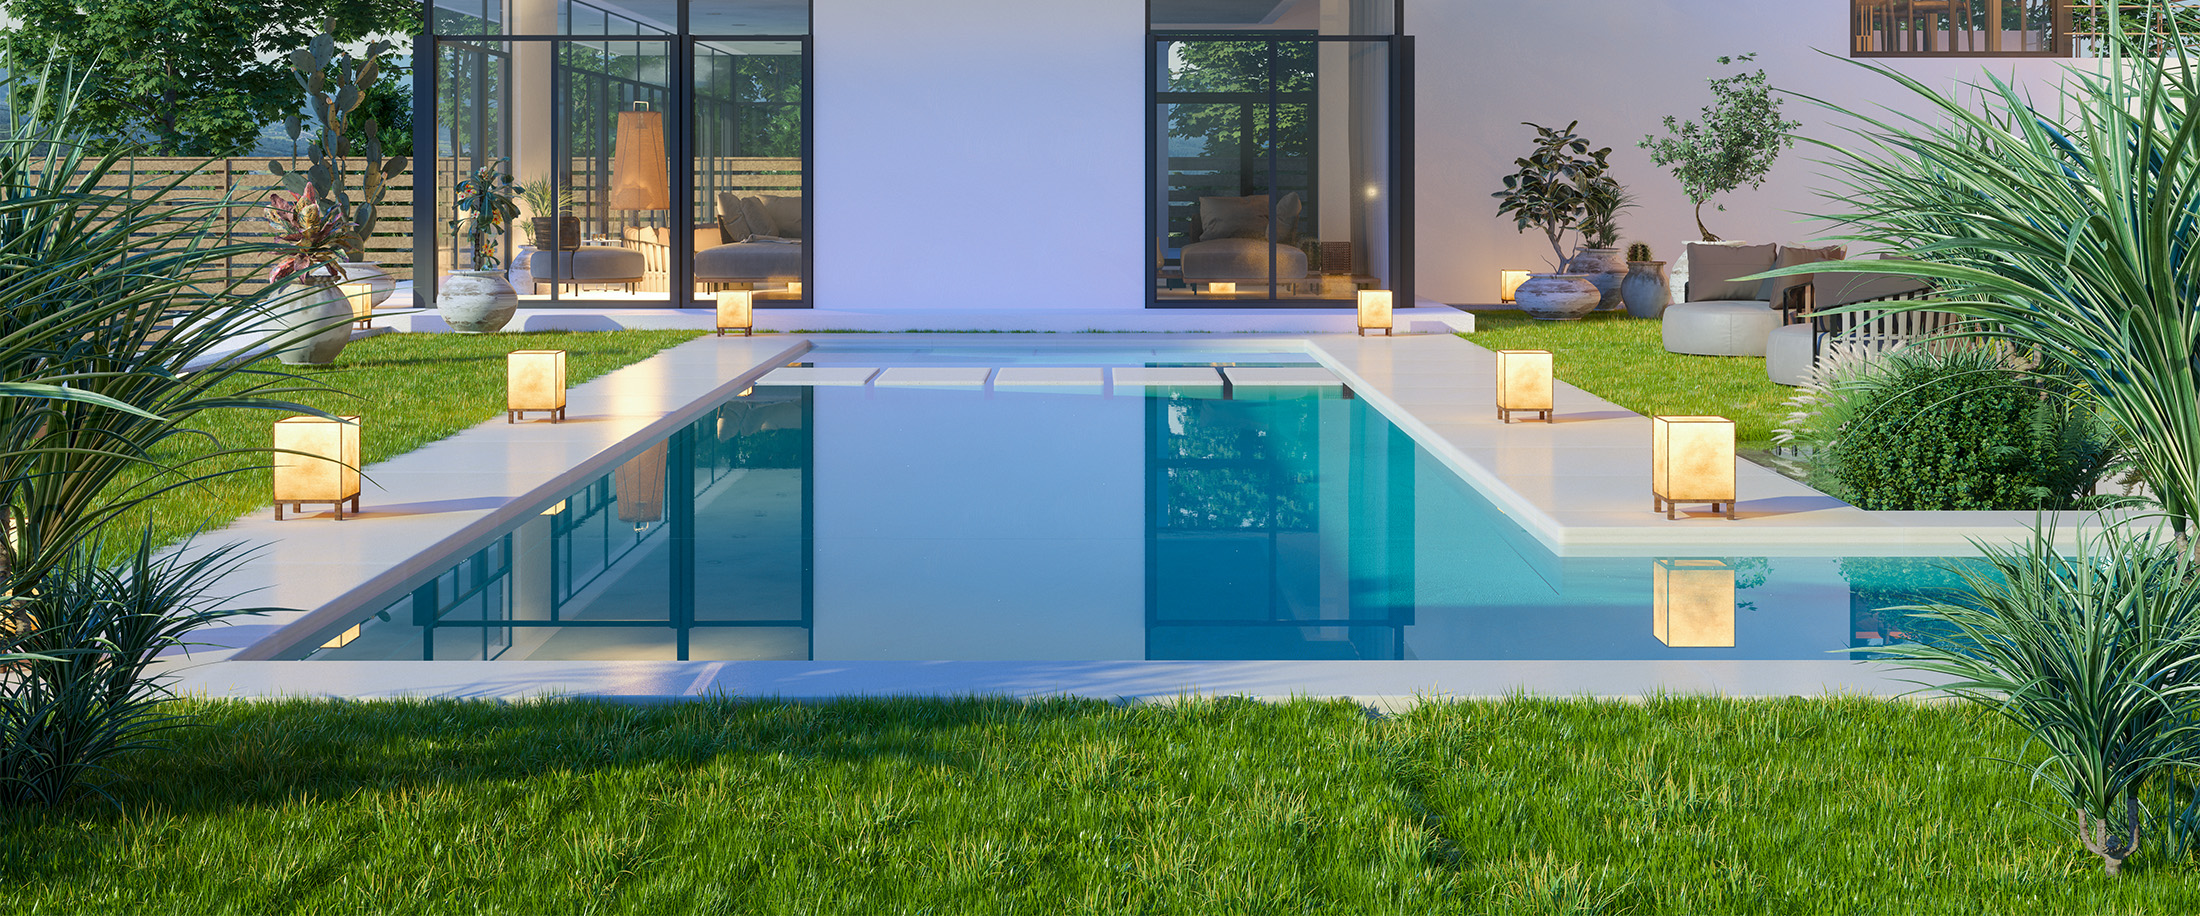 5 Questions to Ask When Buying a House with an Inground Pool